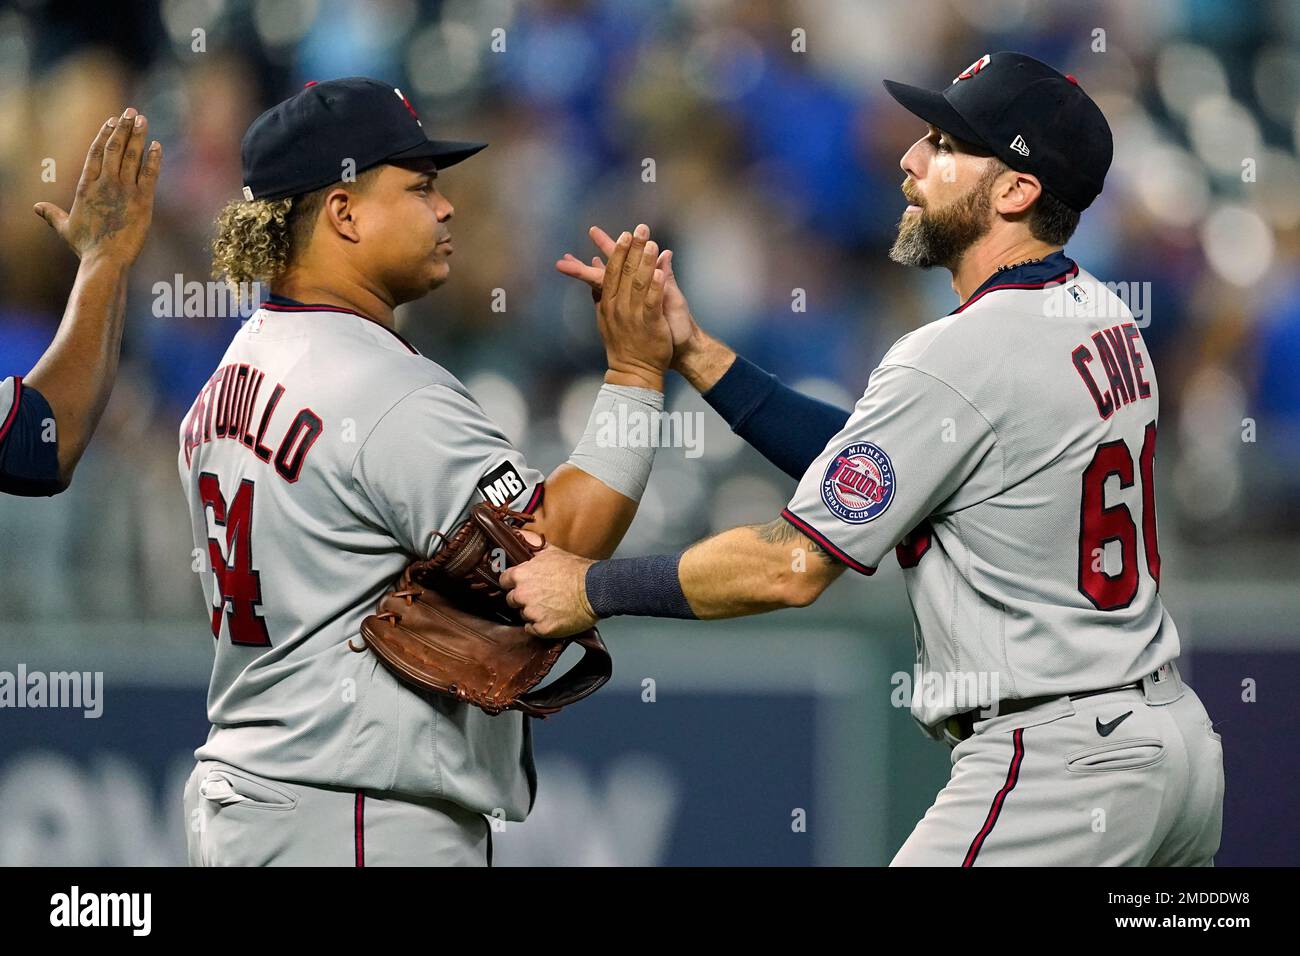 Minnesota Twins' Willians Astudillo, left, and Jake Cave celebrate after  their baseball game against the Kansas